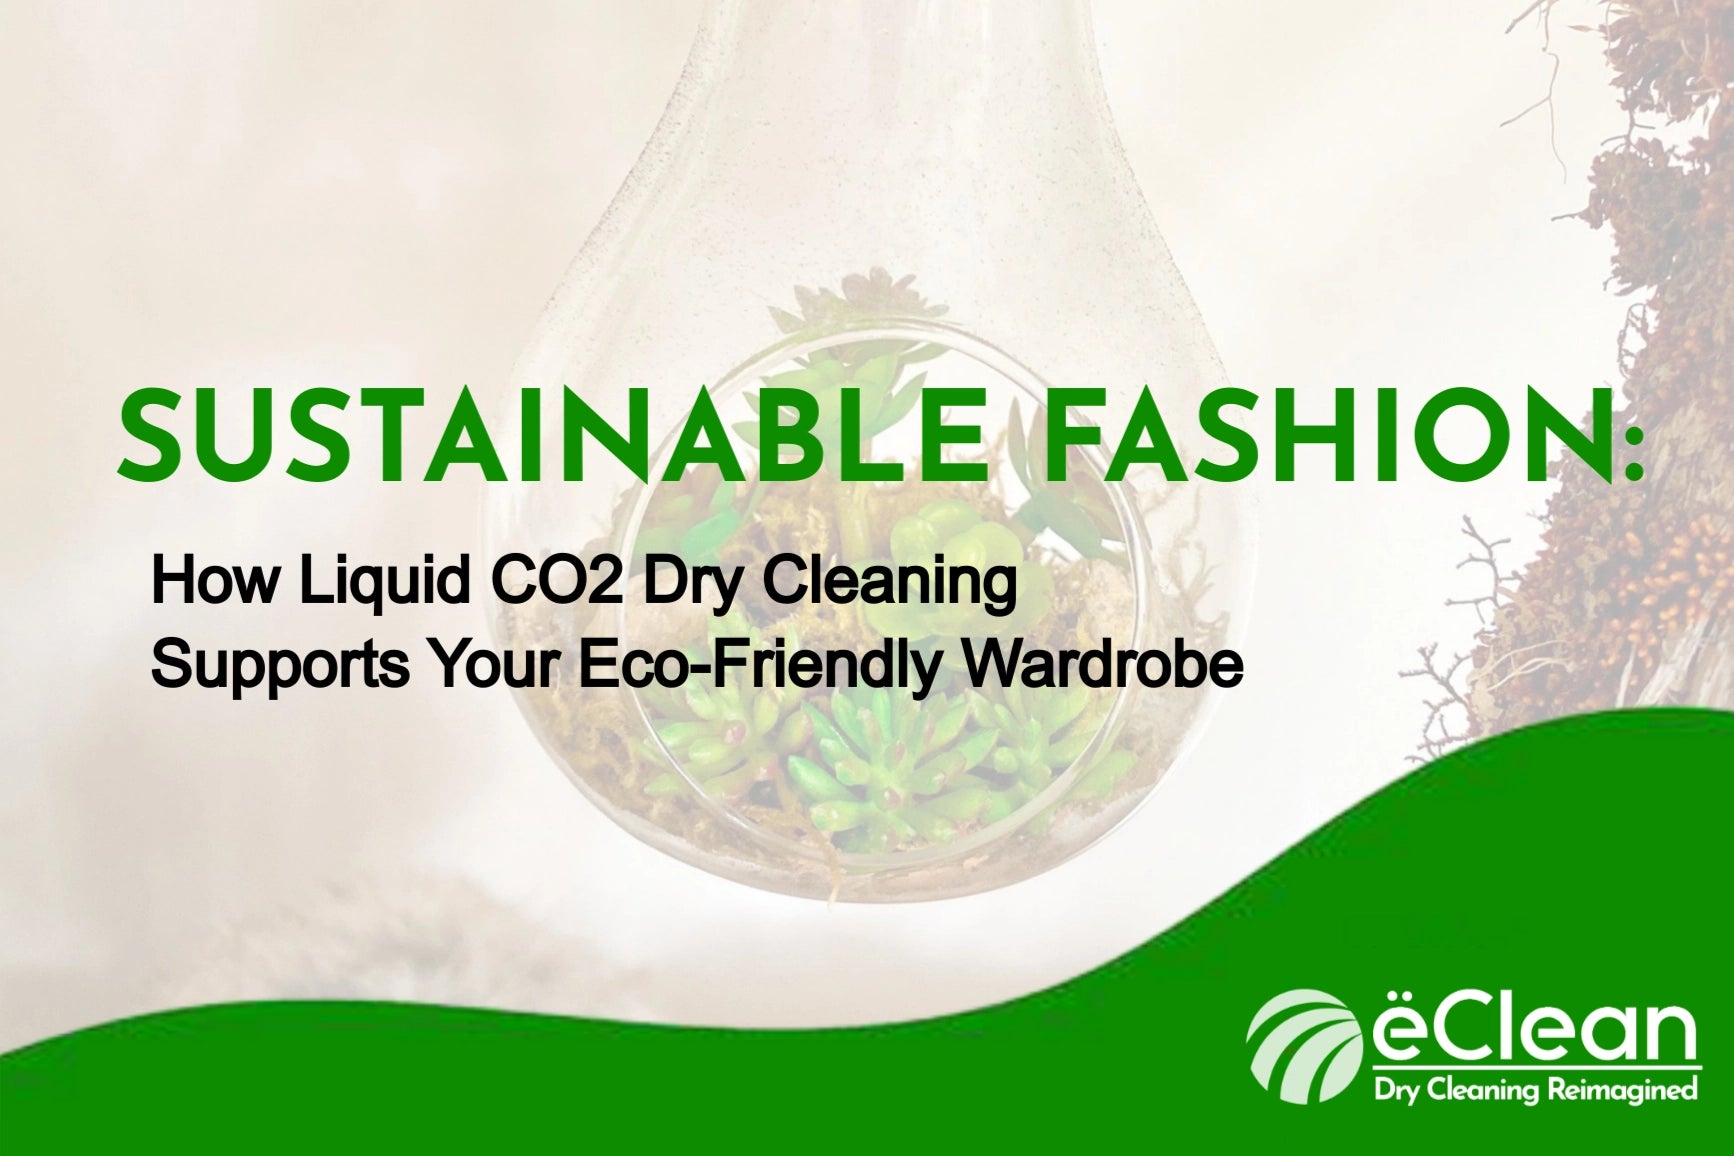 Sustainable Fashion: How Liquid CO2 Dry Cleaning Supports Your Eco-Friendly Wardrobe